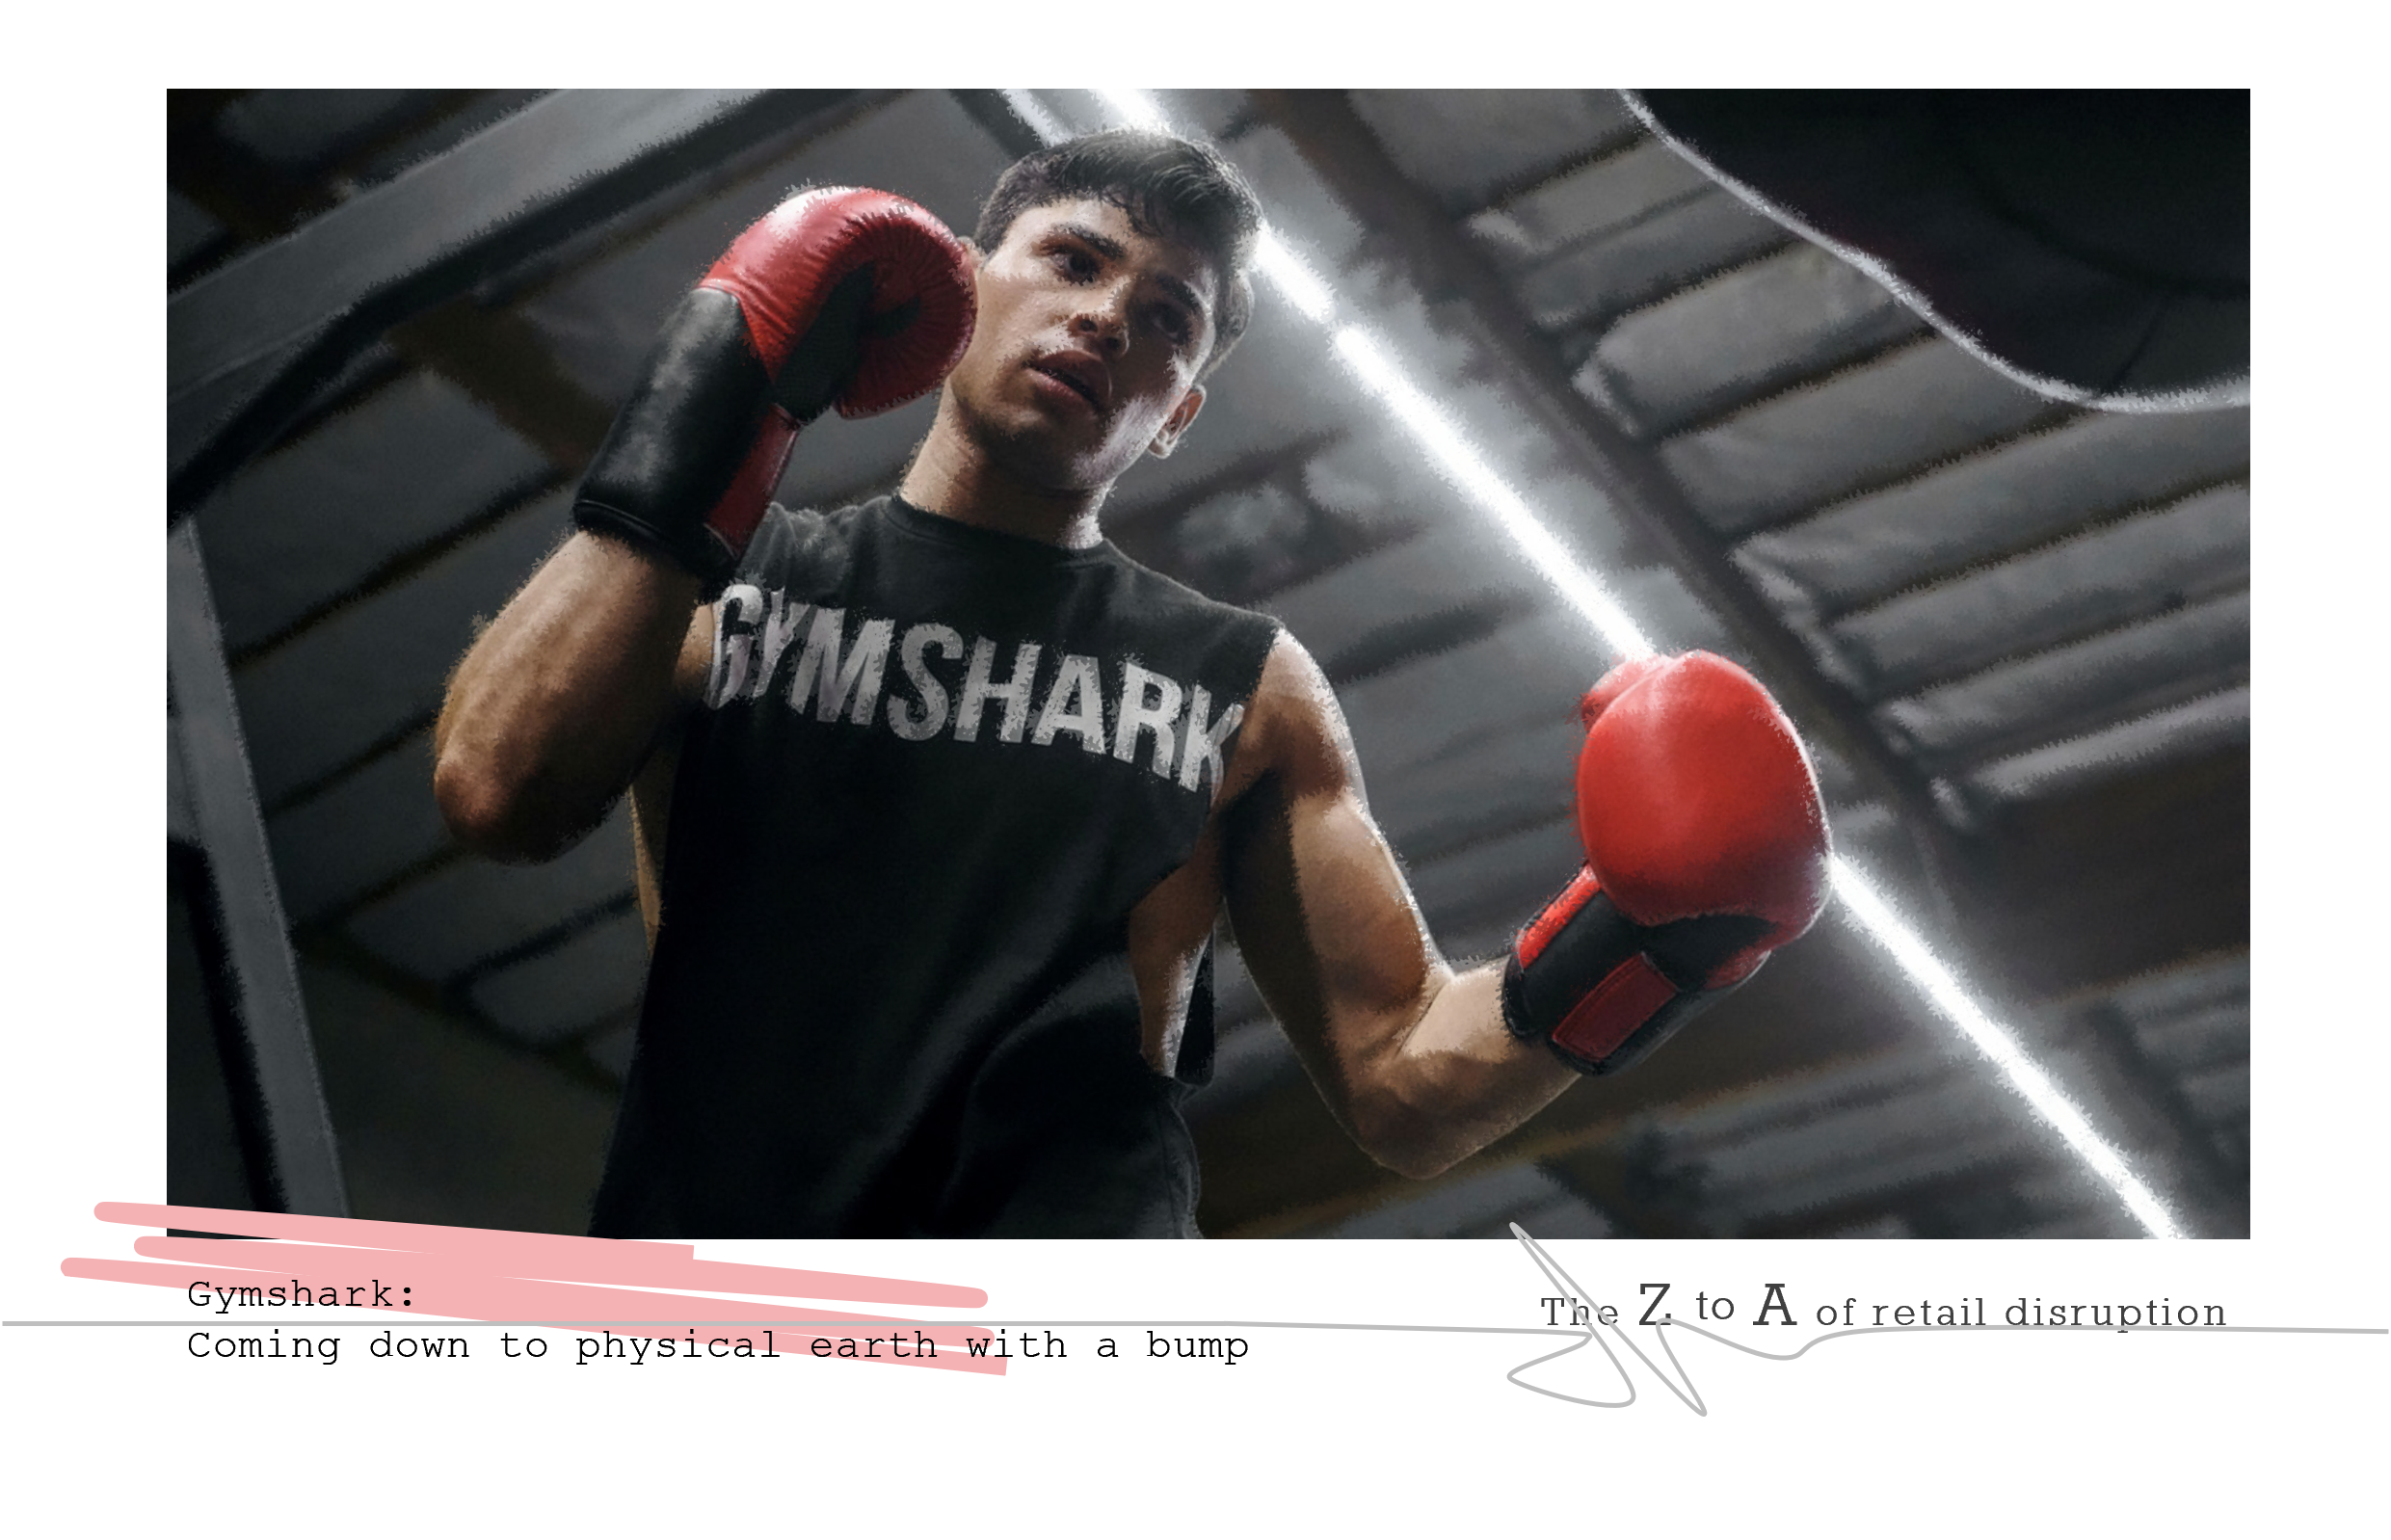 Gymshark: Coming down to physical earth with a bump